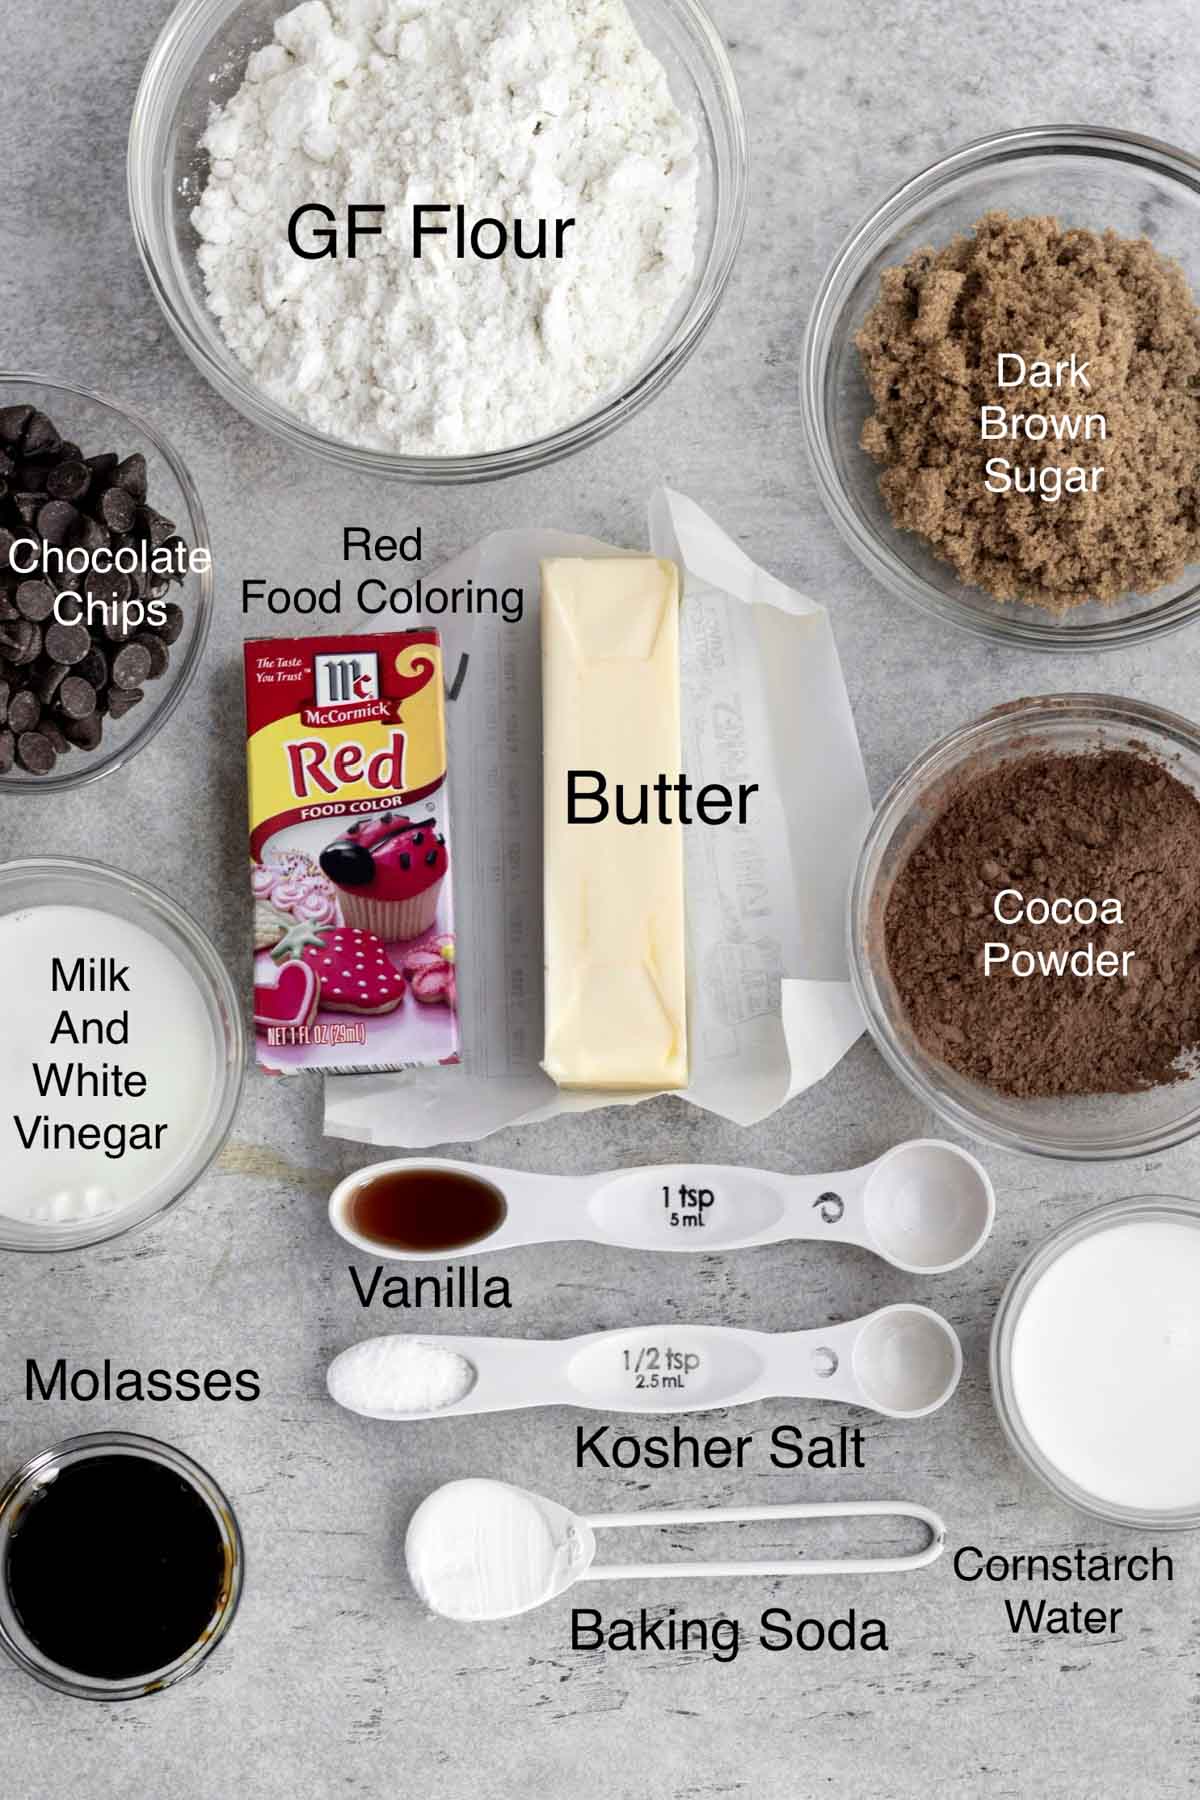 The ingredients for the cookies in separate containers with their text names over it.